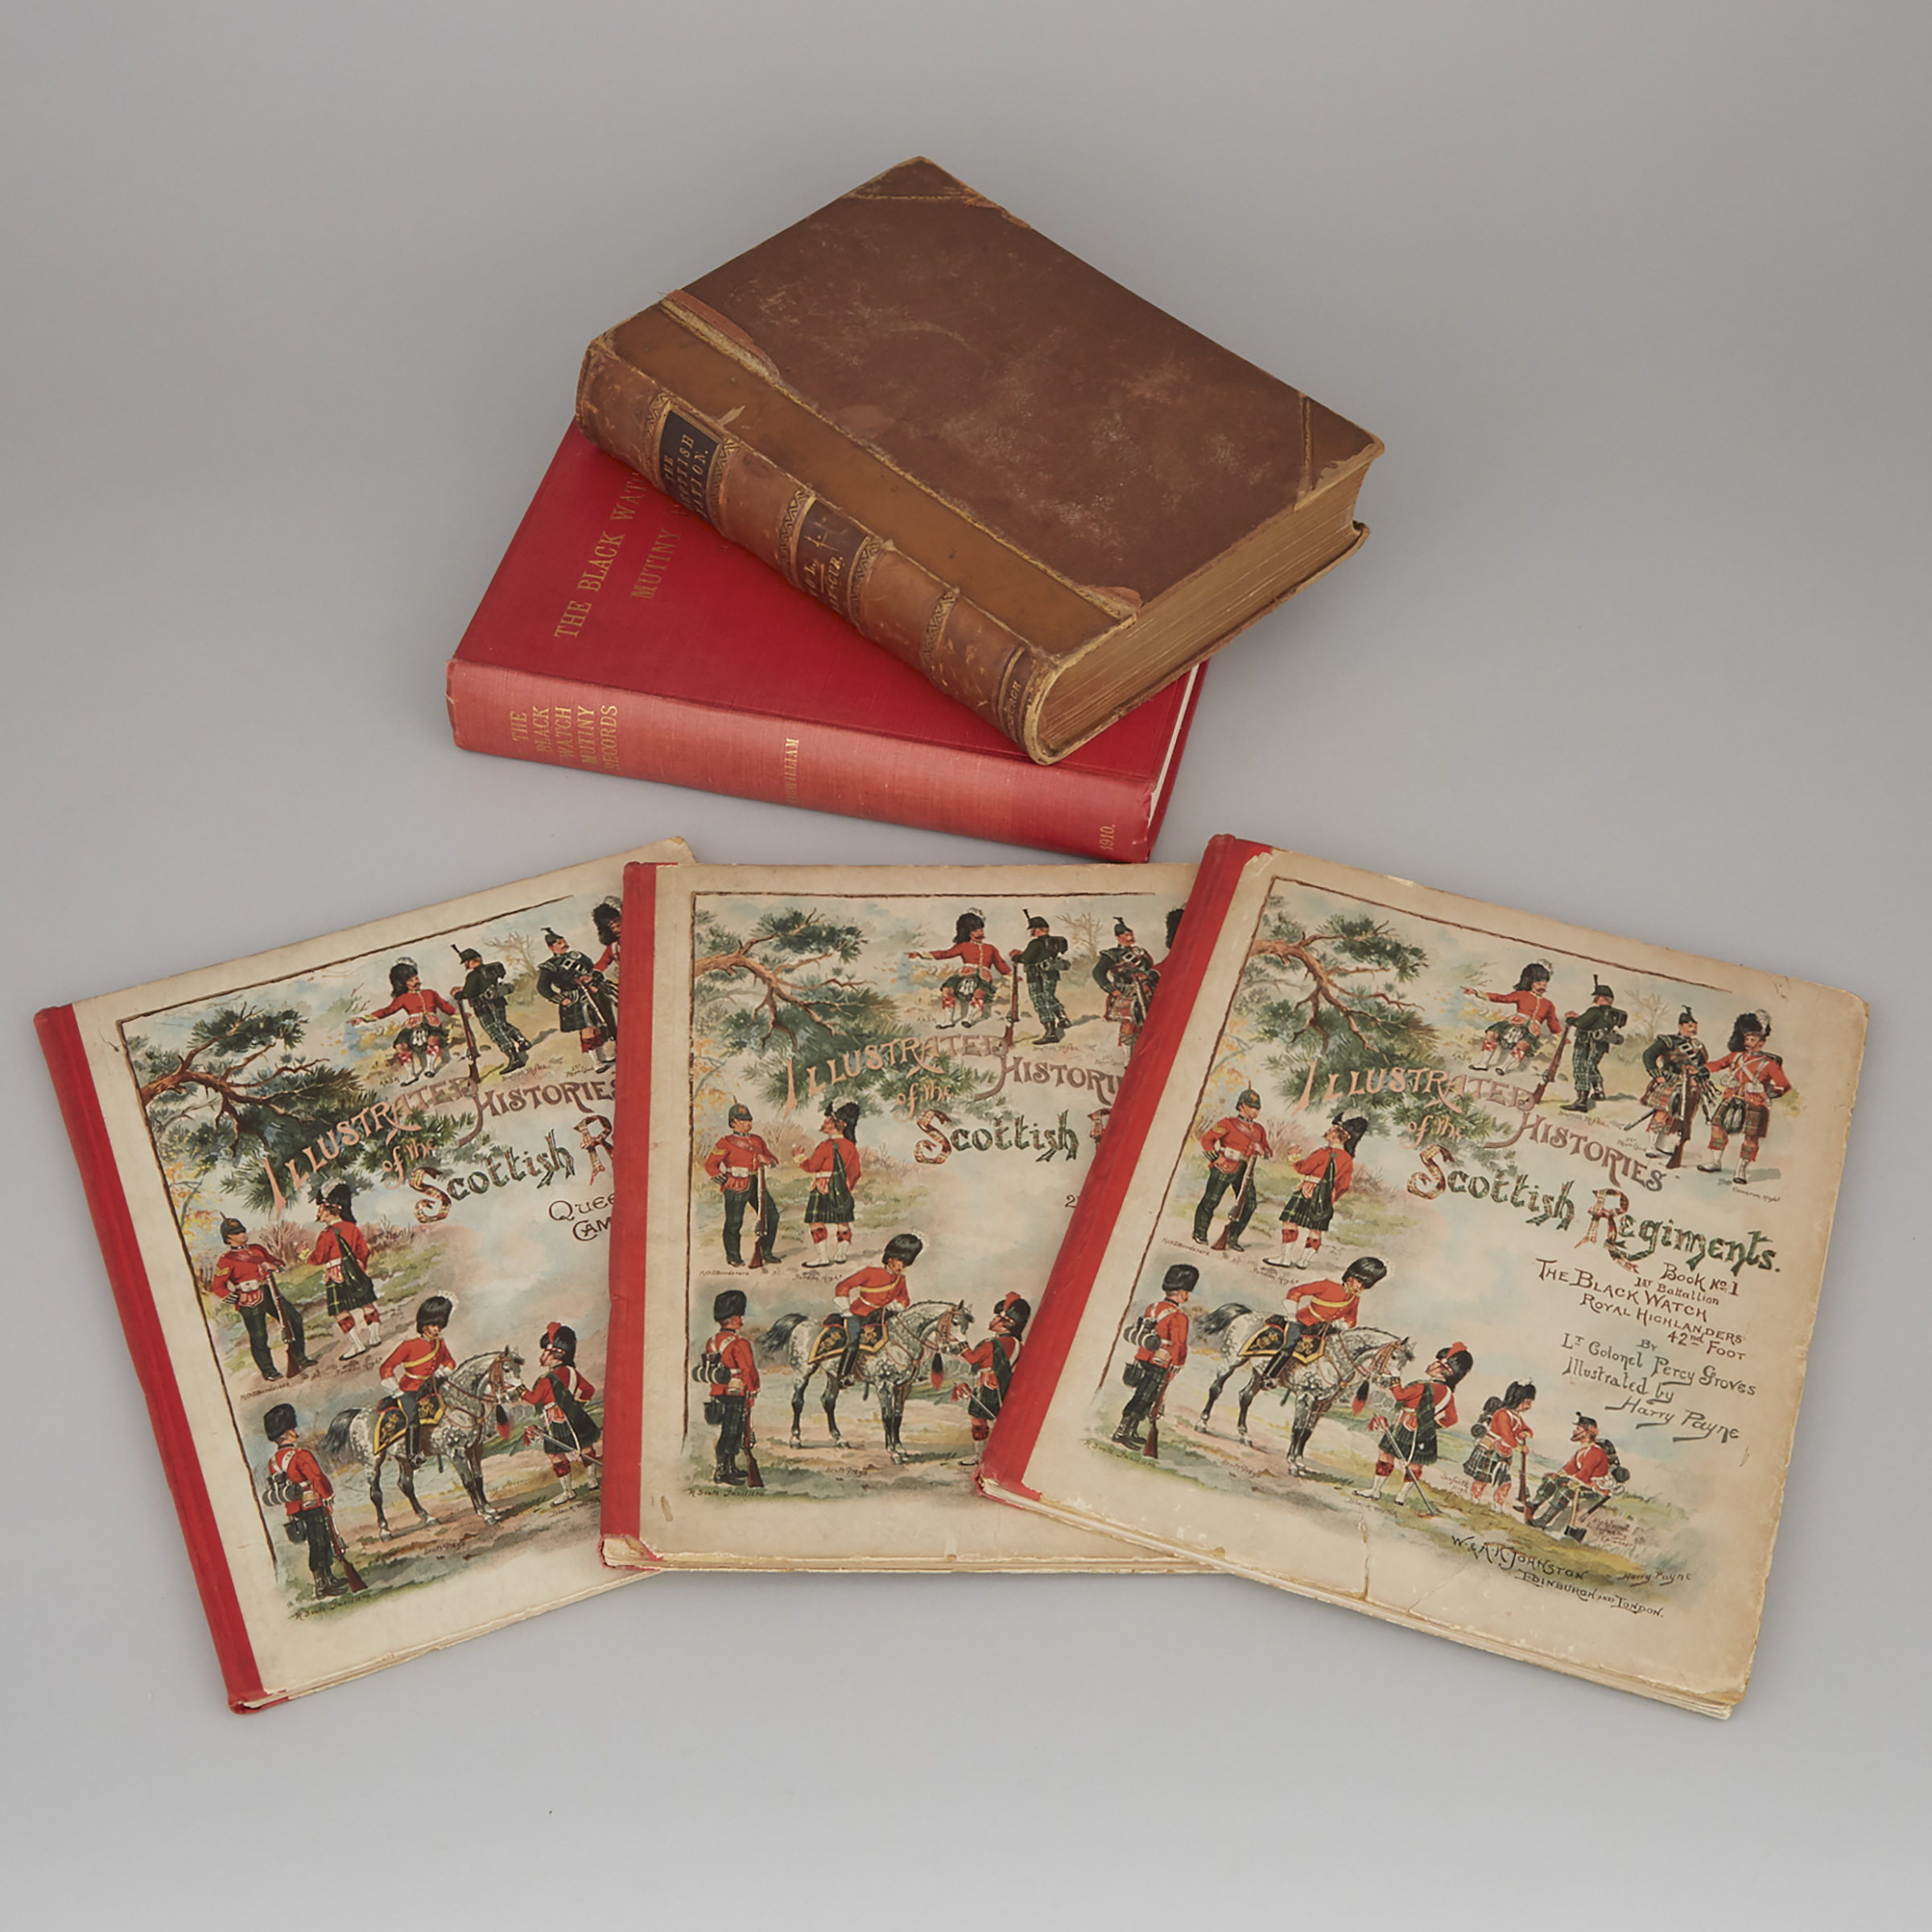 Five Volumes on Scottish Culture and History